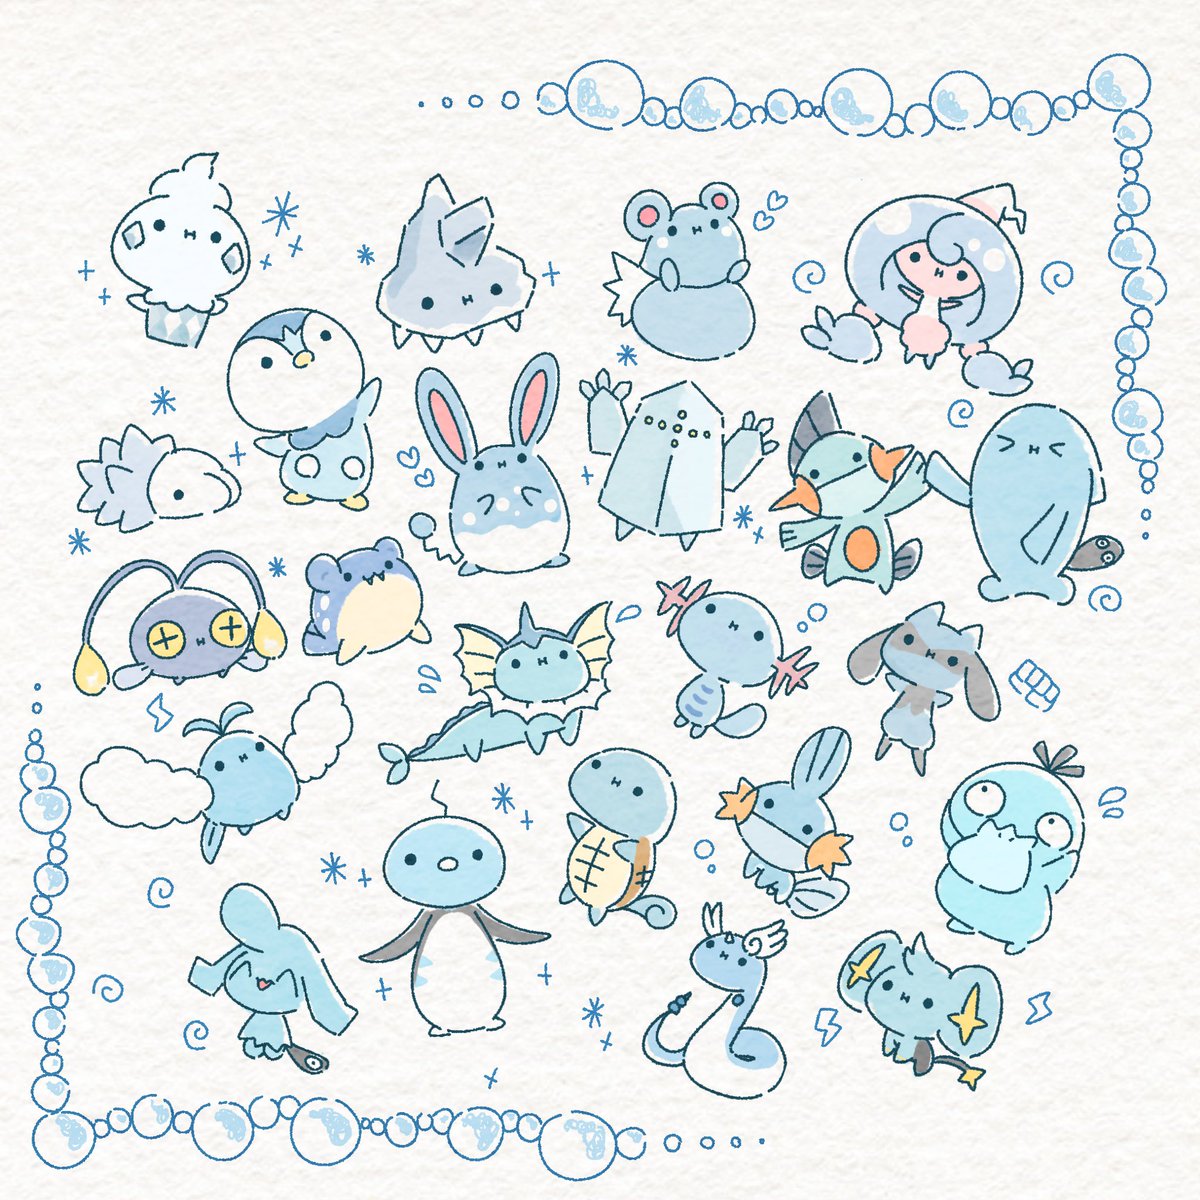 mudkip pokemon (creature) no humans > < smile closed eyes open mouth heart  illustration images